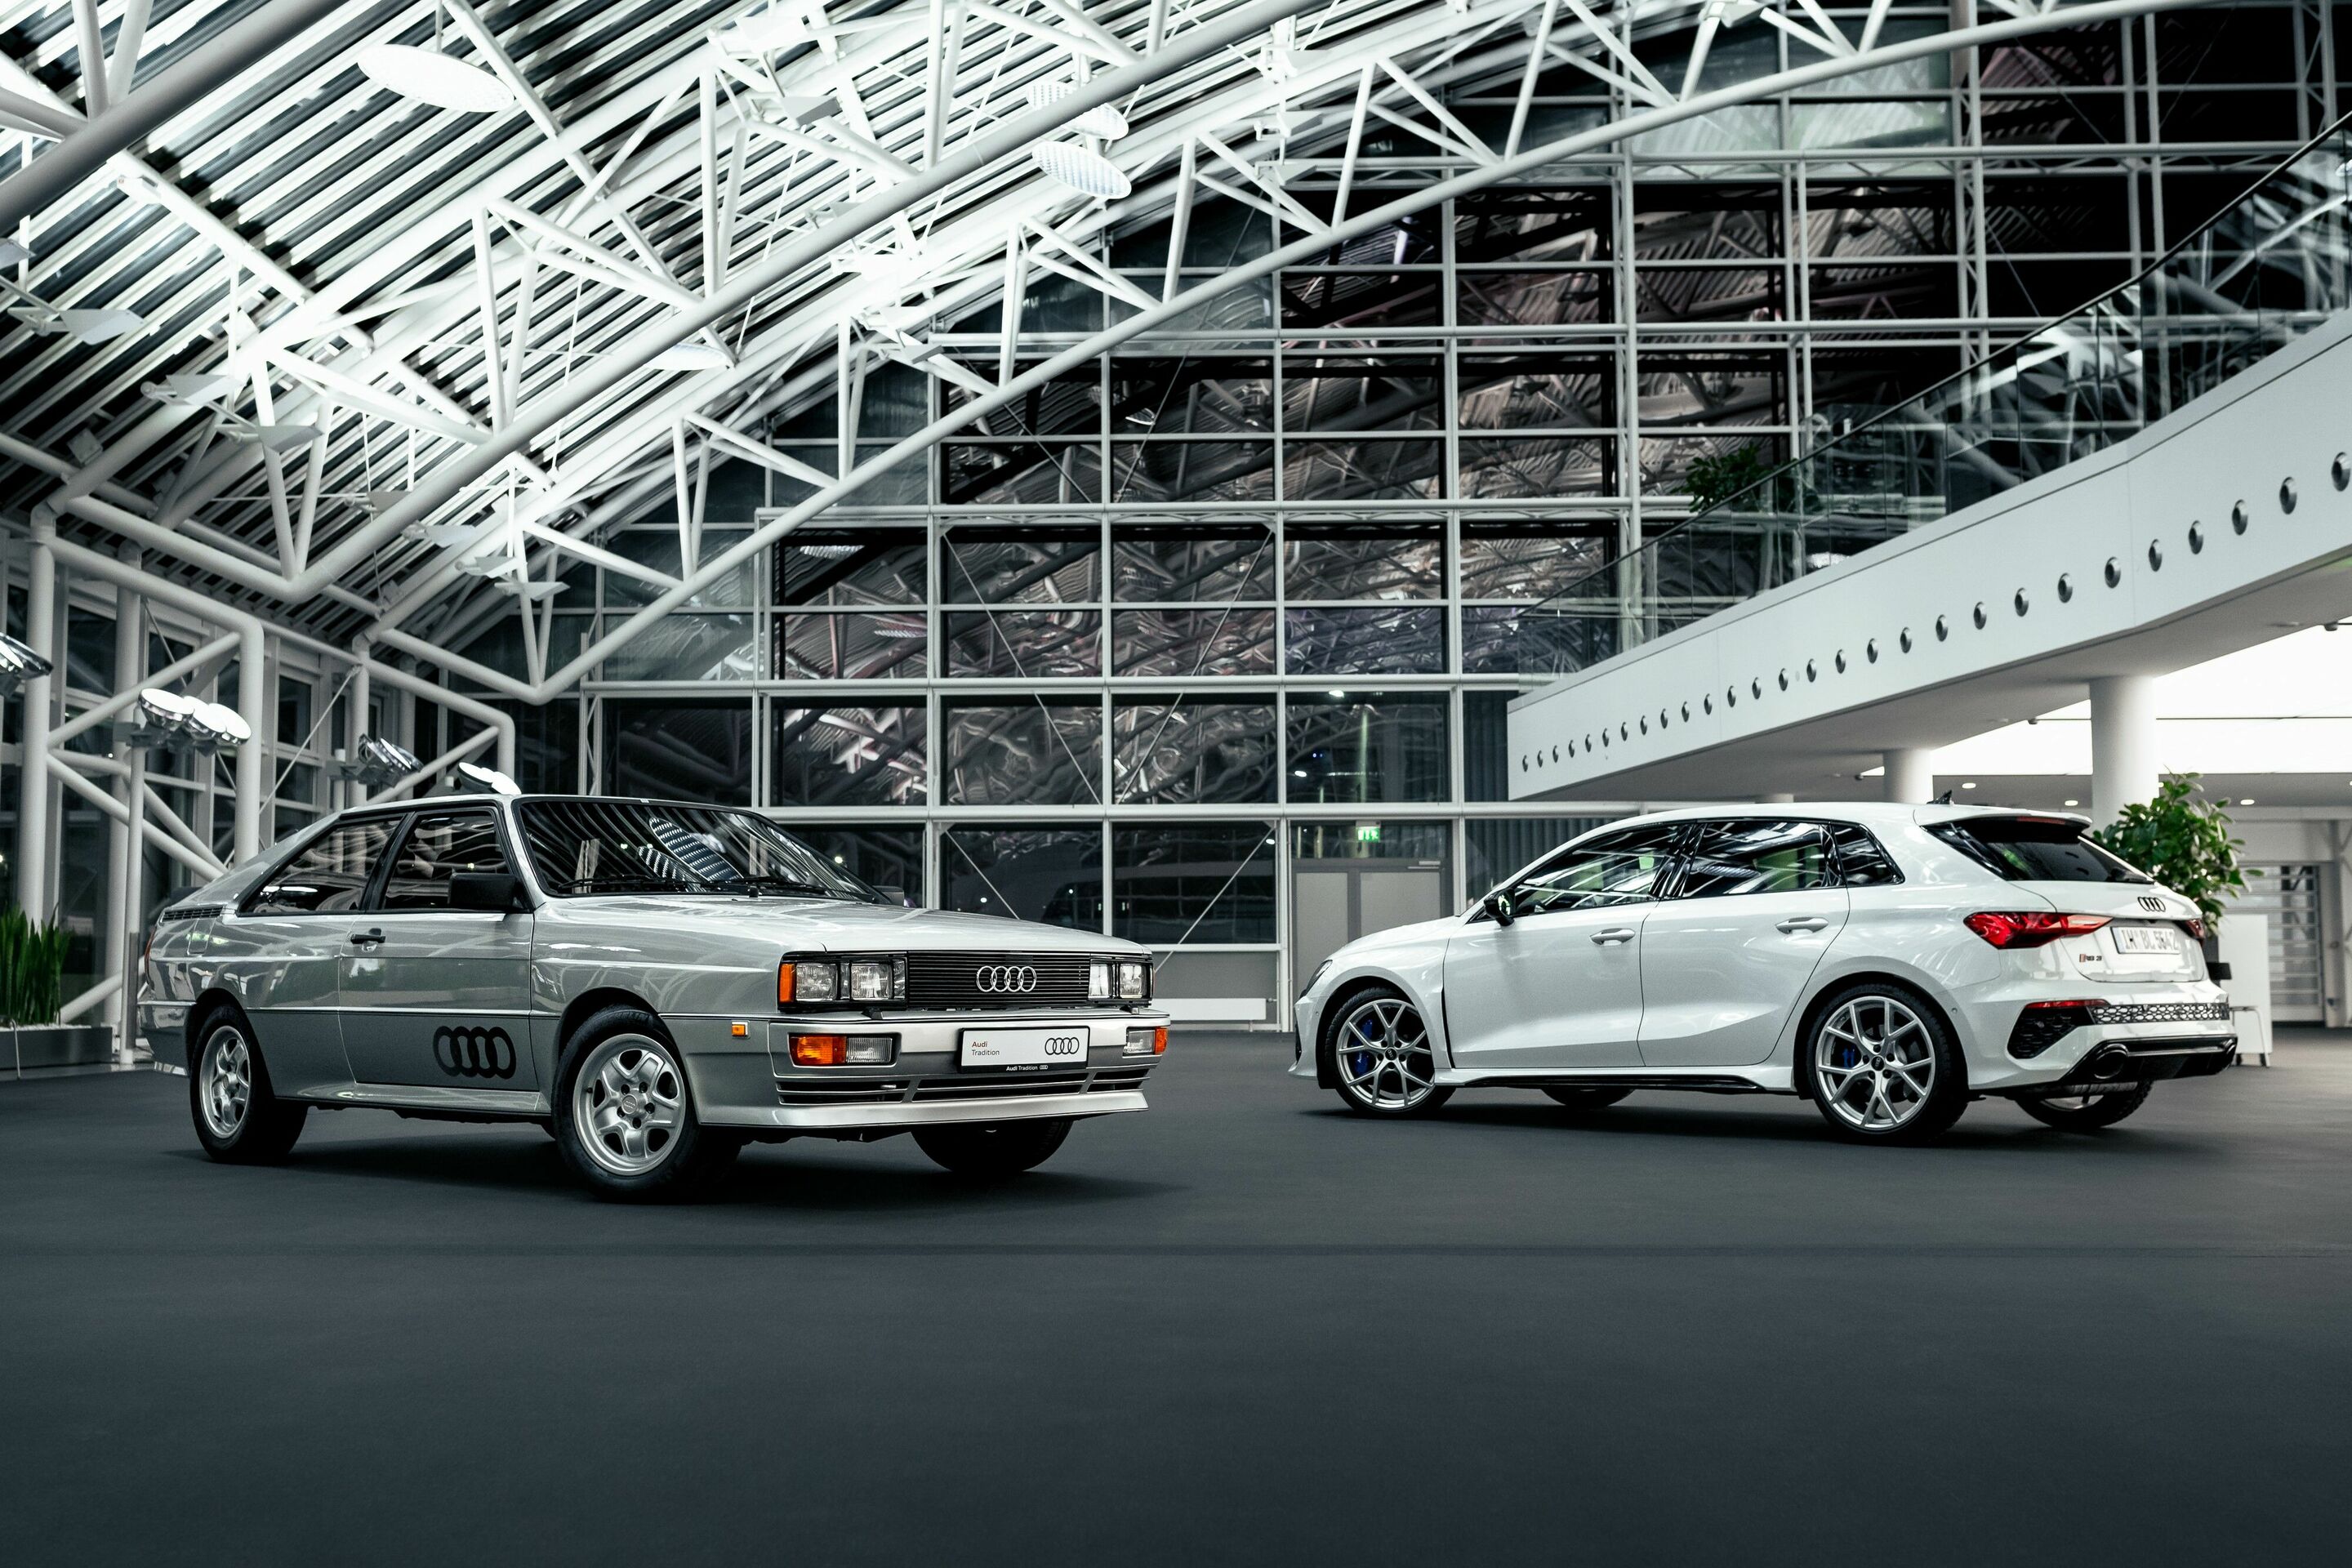 Past and present - Two generations of quattro and five-cylinder are part of Audi's DNA "Vorsprung durch Technik"